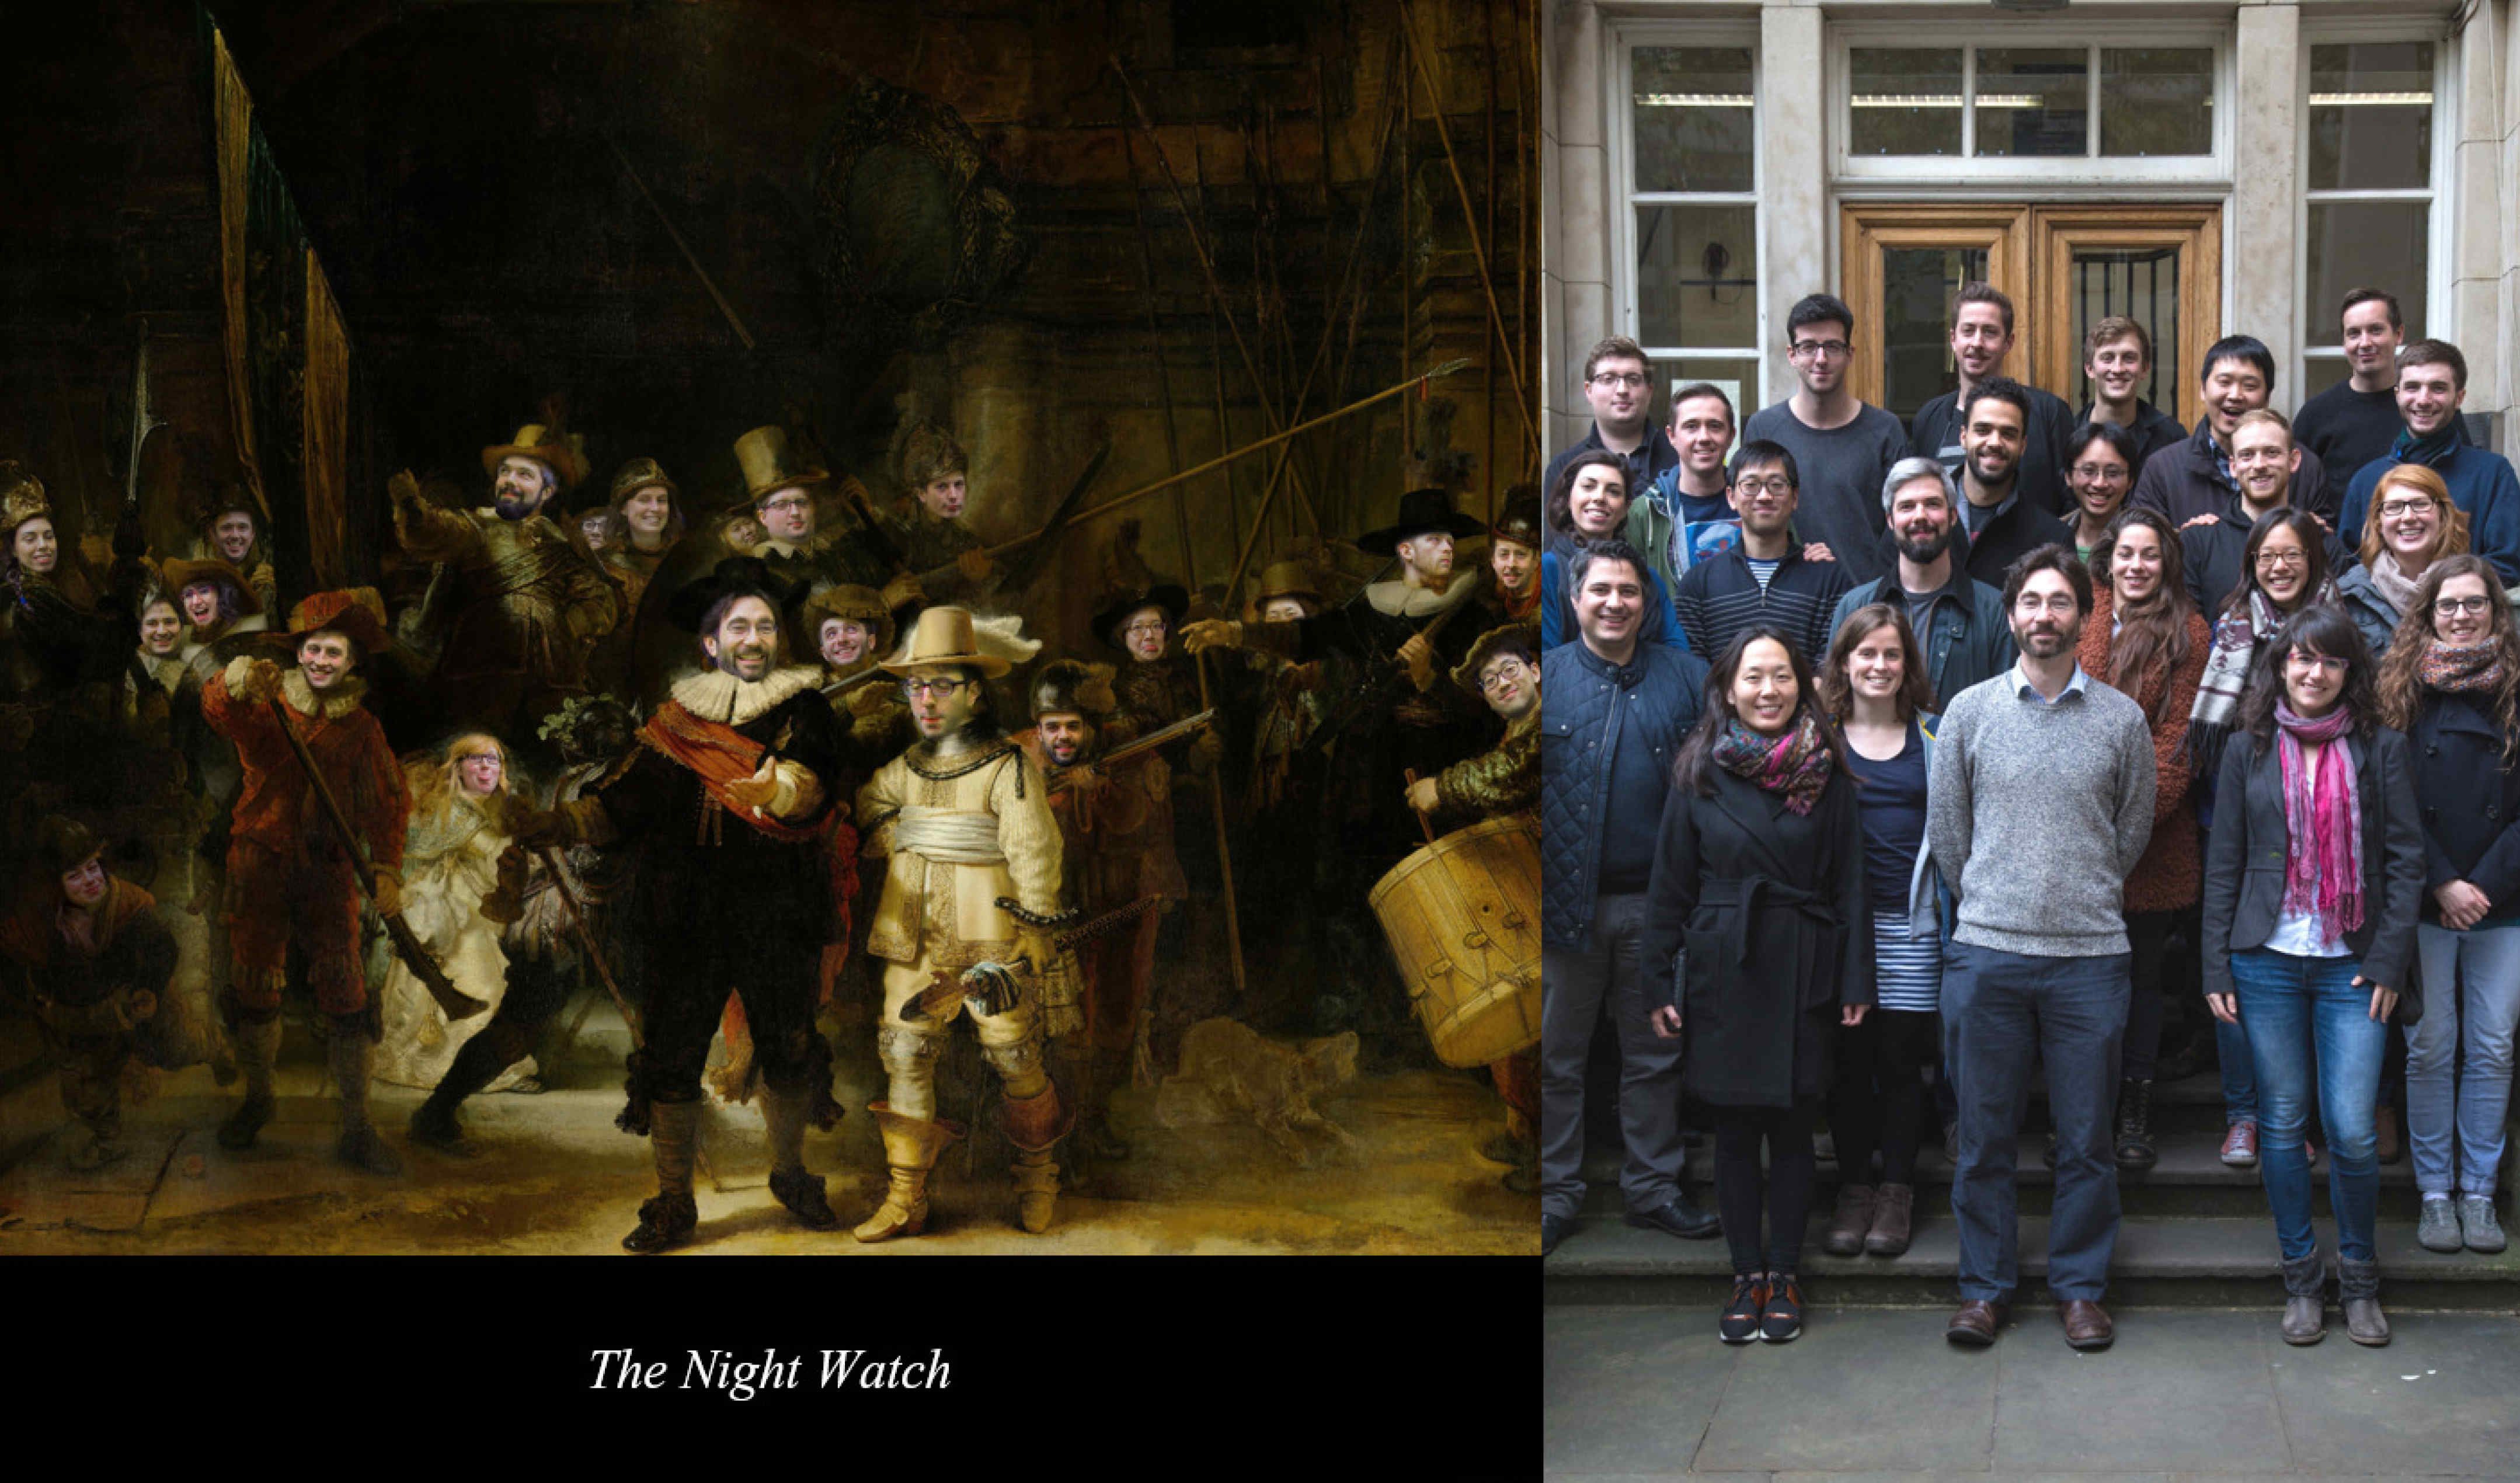 Faces put onto Rembrandts 'Night Watch' alongside 2016 group photo